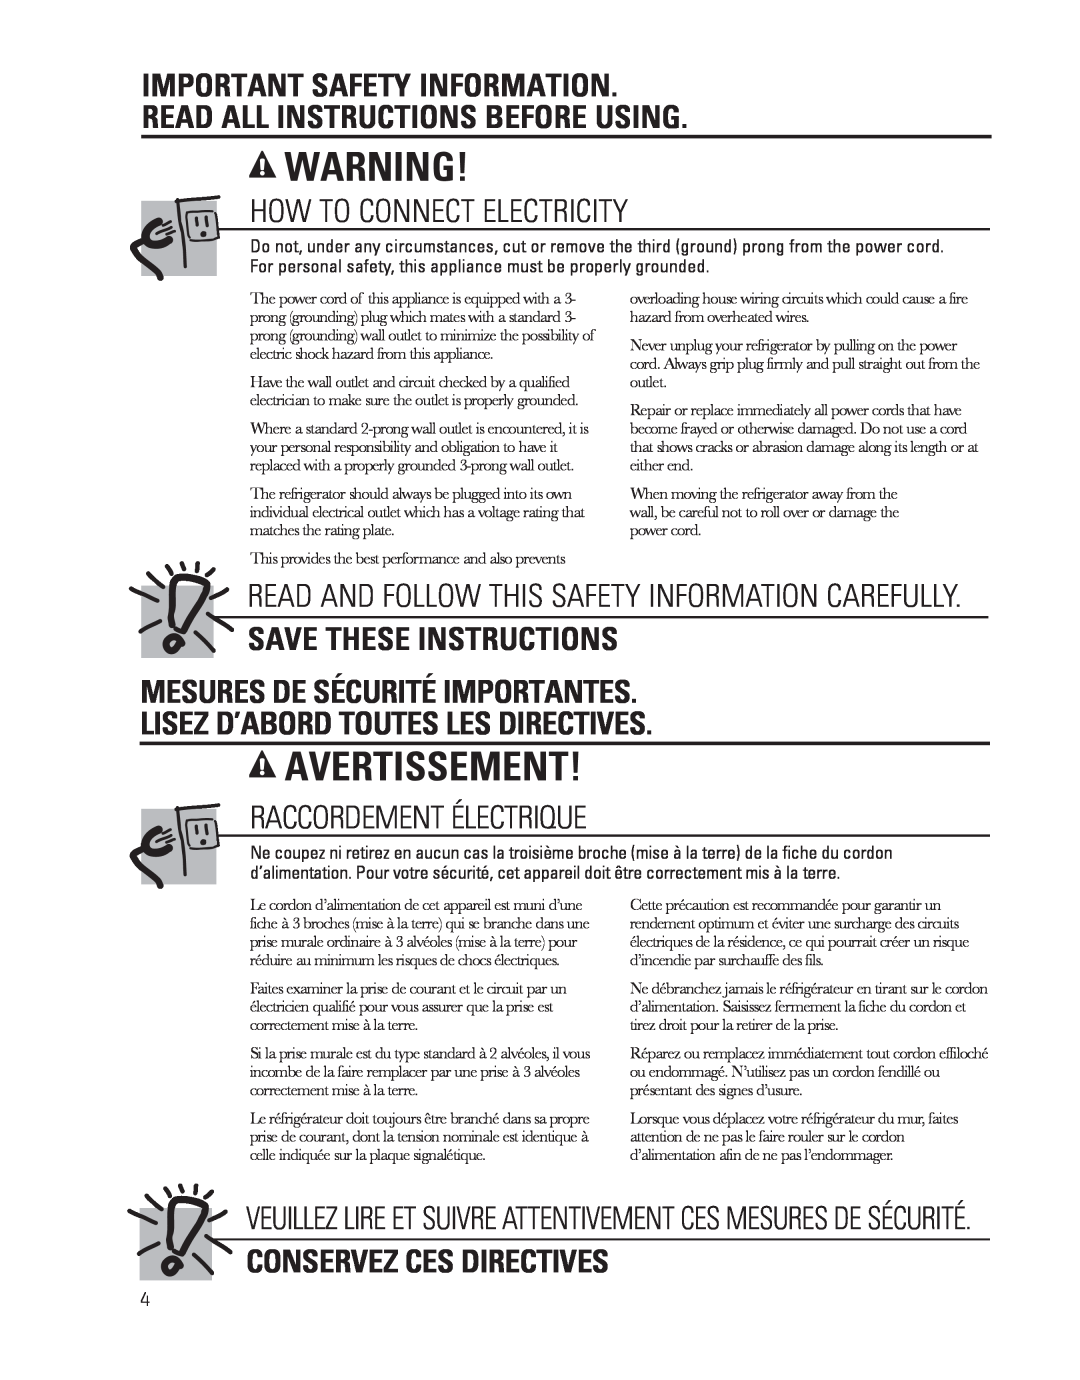 GE 17 Important Safety Information Read All Instructions Before Using, How To Connect Electricity, Raccordement Électrique 